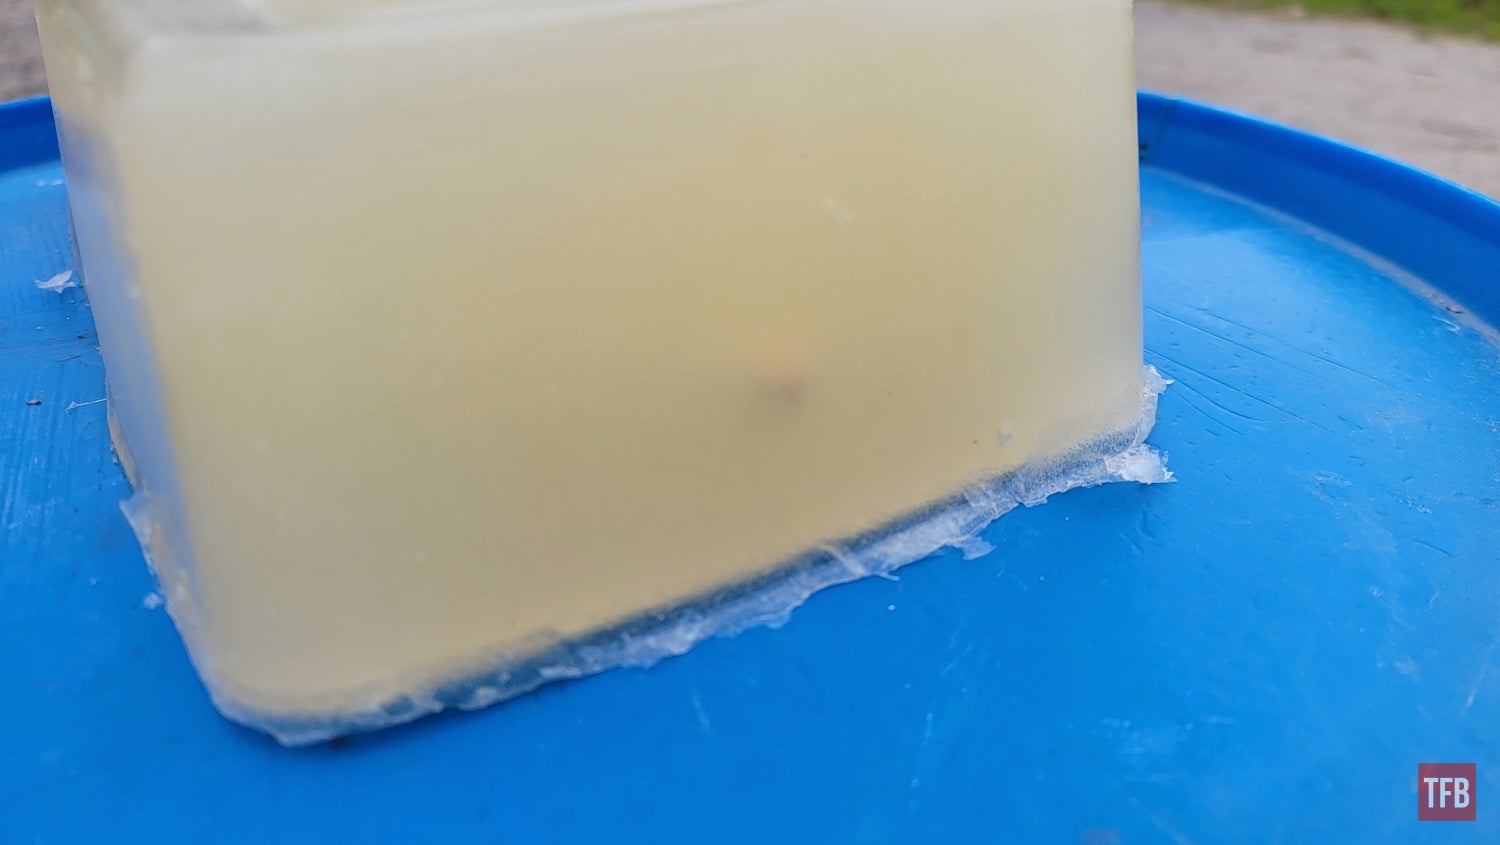 A DIY Guide to Making Your Own Affordable Ballistics Gel